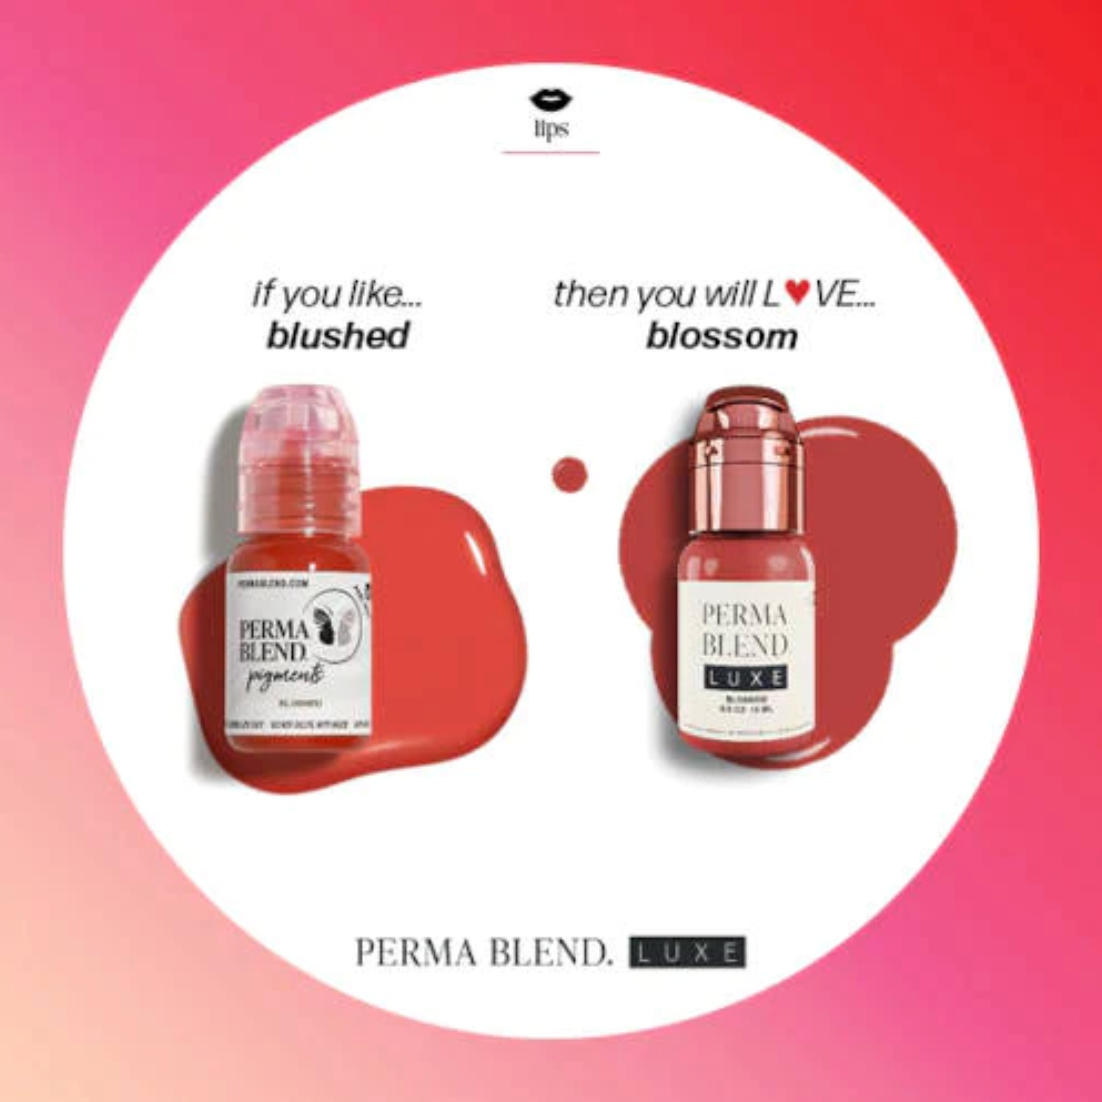 Perma Blend LUXE - "Blossom"